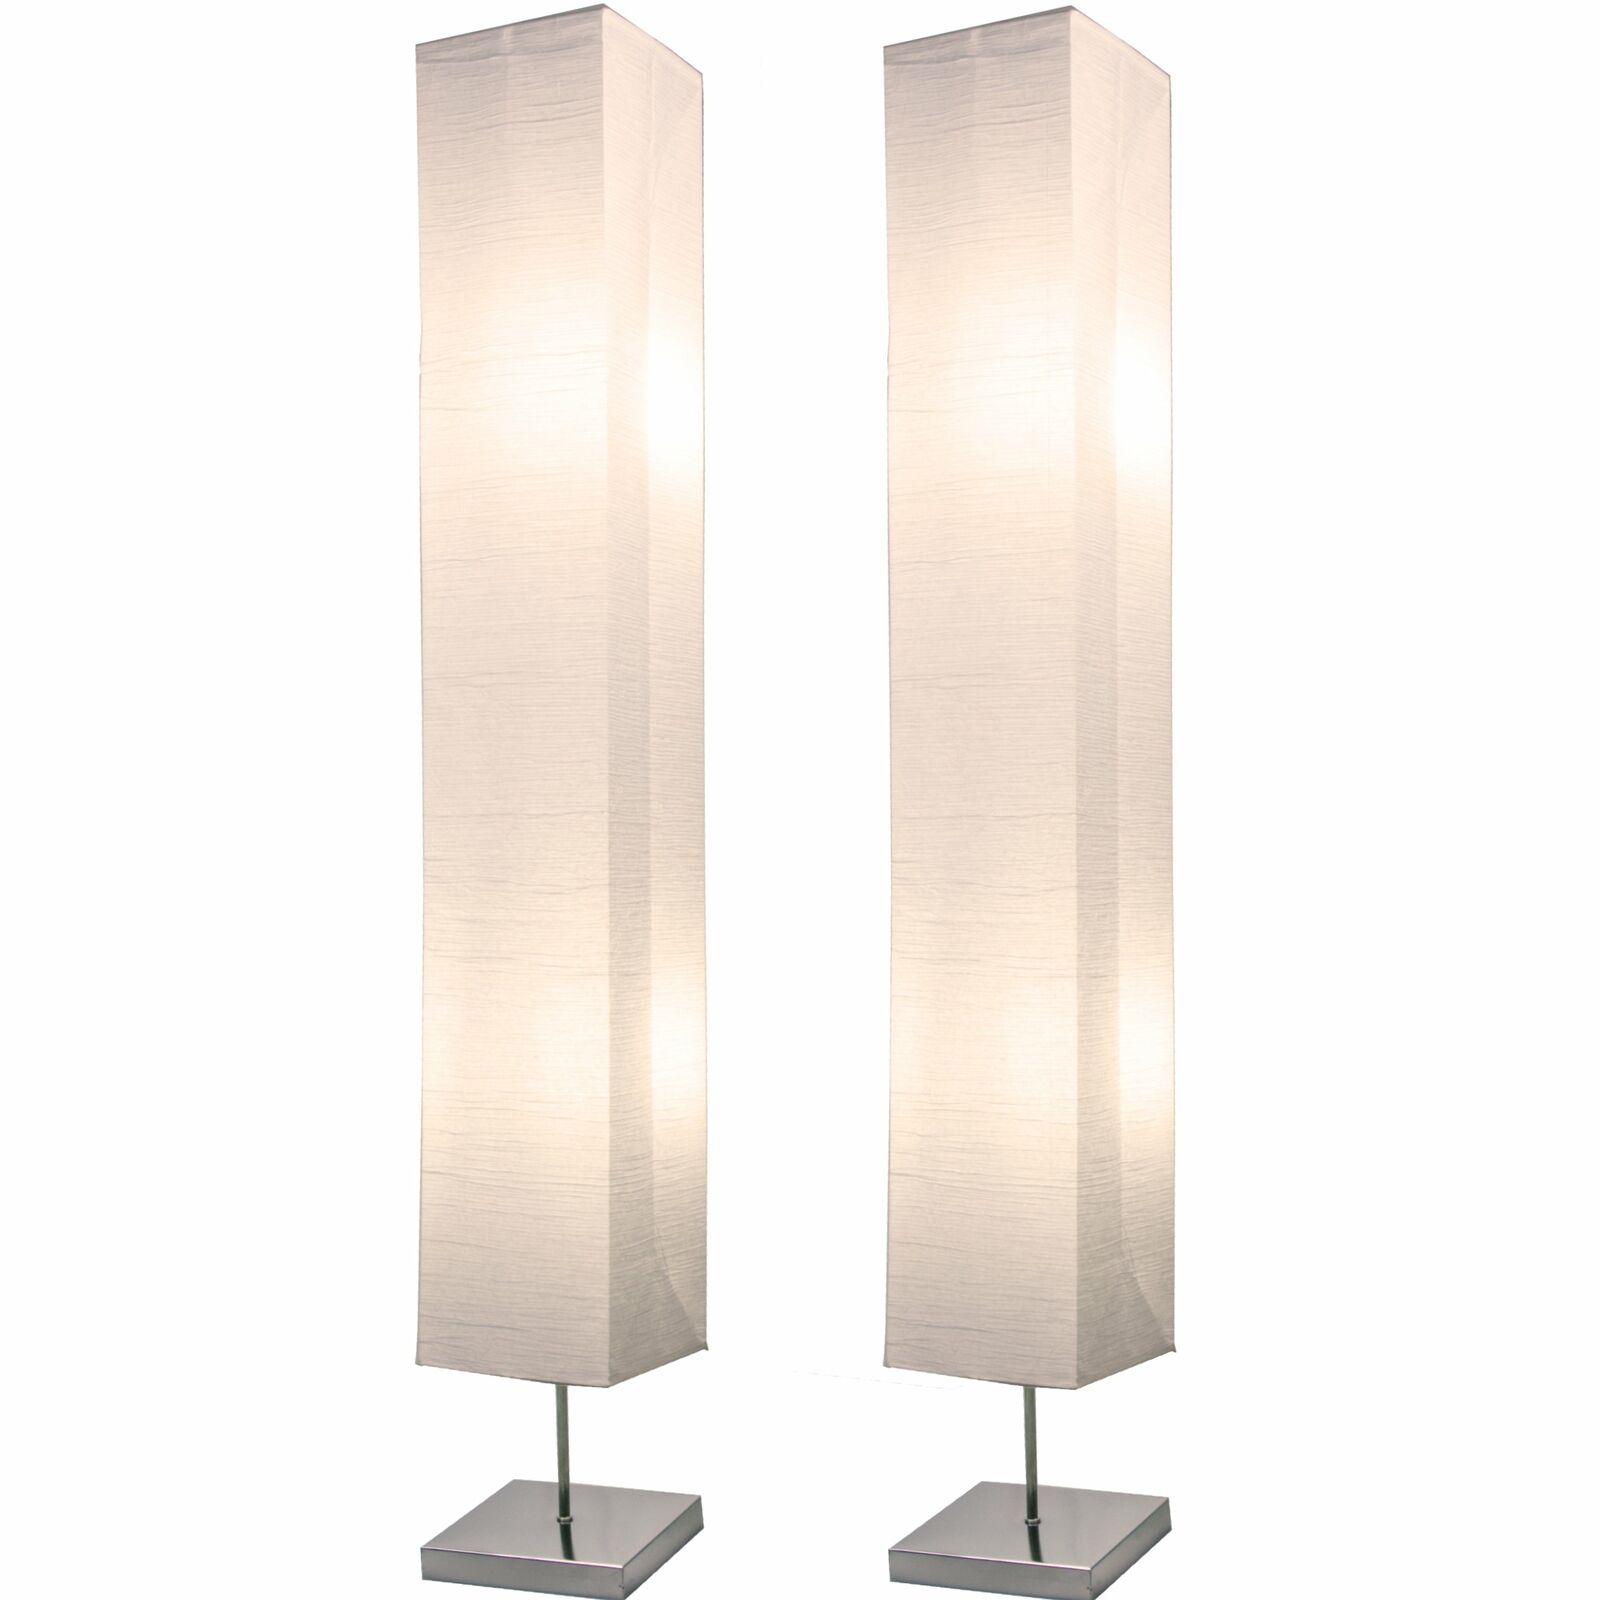 Honors Chrome Floor Lamp Set 50 Inches Tall With White Paper Shade with size 1600 X 1600